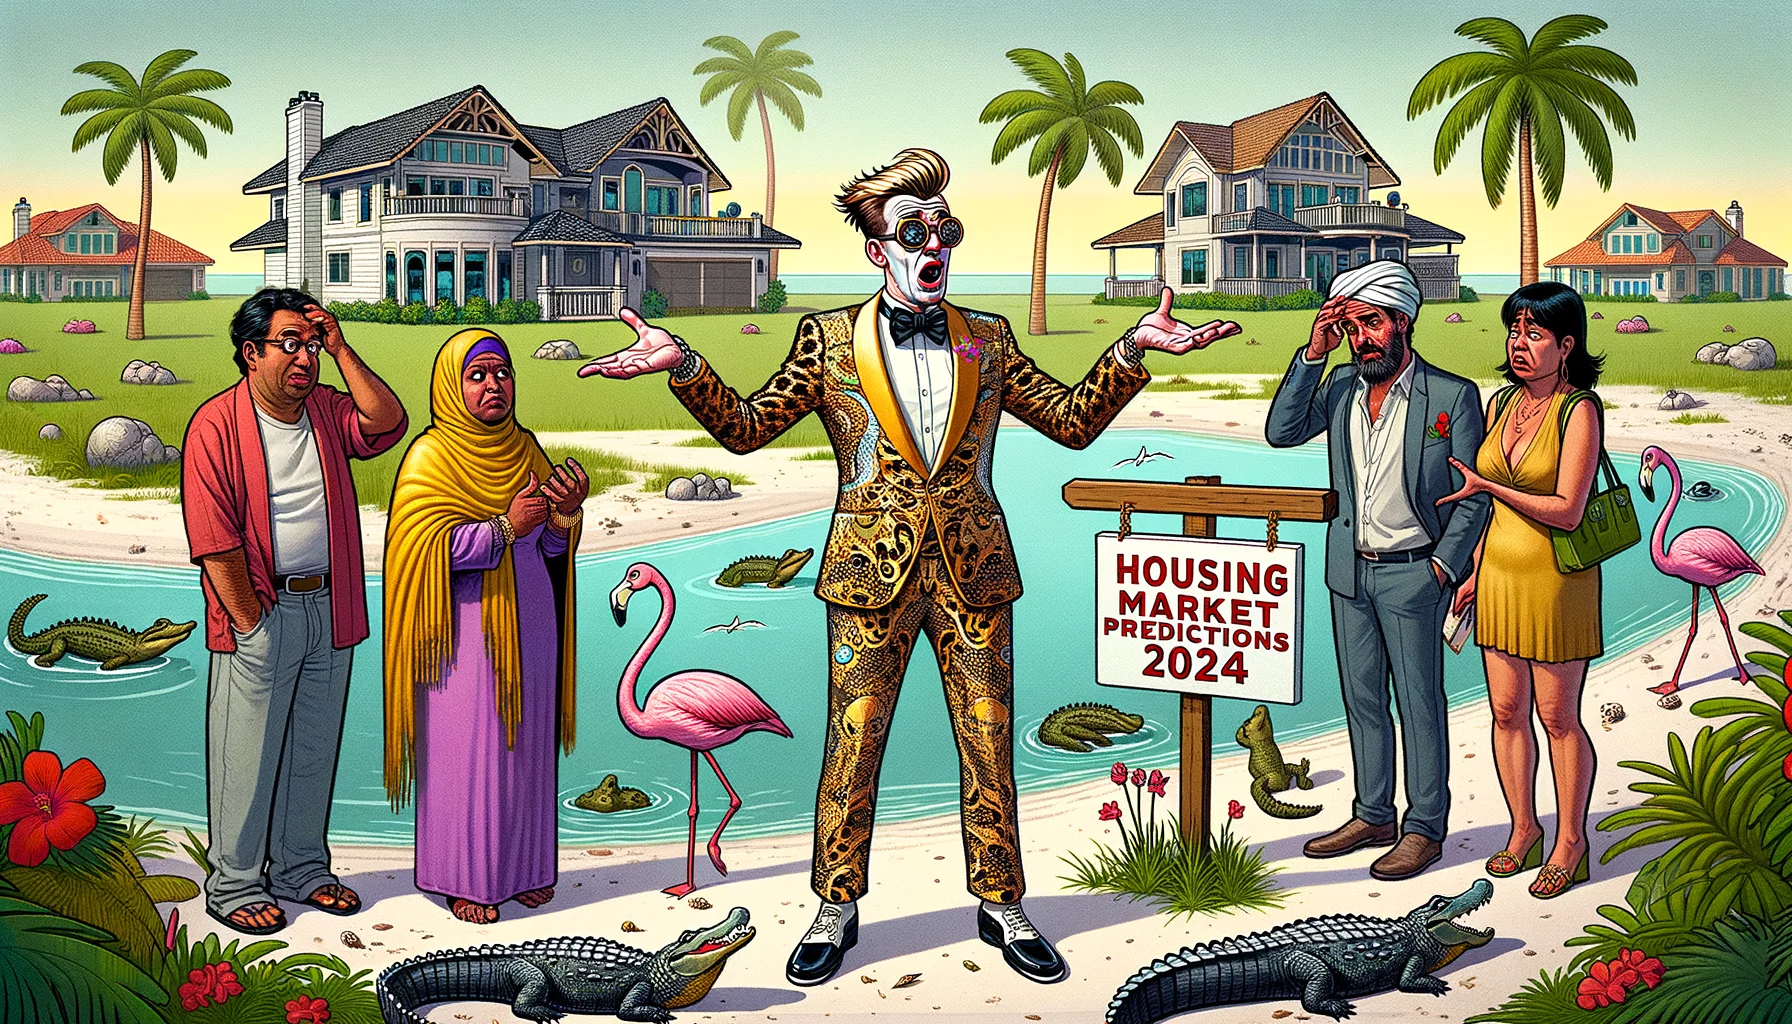 Imagine a comic-like scenario playing humorously with stereotypical aspects of real estate. A cartoonish, slightly exaggerated Florida landscape stretches out. A mix of palm trees, sandy beaches, and alligators are visible. In the middle stands a flamboyantly dressed real estate agent - a Caucasian man in his 40s, with a humorous expression, flailing arms, gesturing towards a tiny shack labelled 'Luxury Villa 2024'. Bemused prospective buyers, a South Asian lady and a Middle-Eastern man, scratch their heads in confusion. In the corner, a flamingo holds a banner reading 'Housing Market Predictions 2024'.